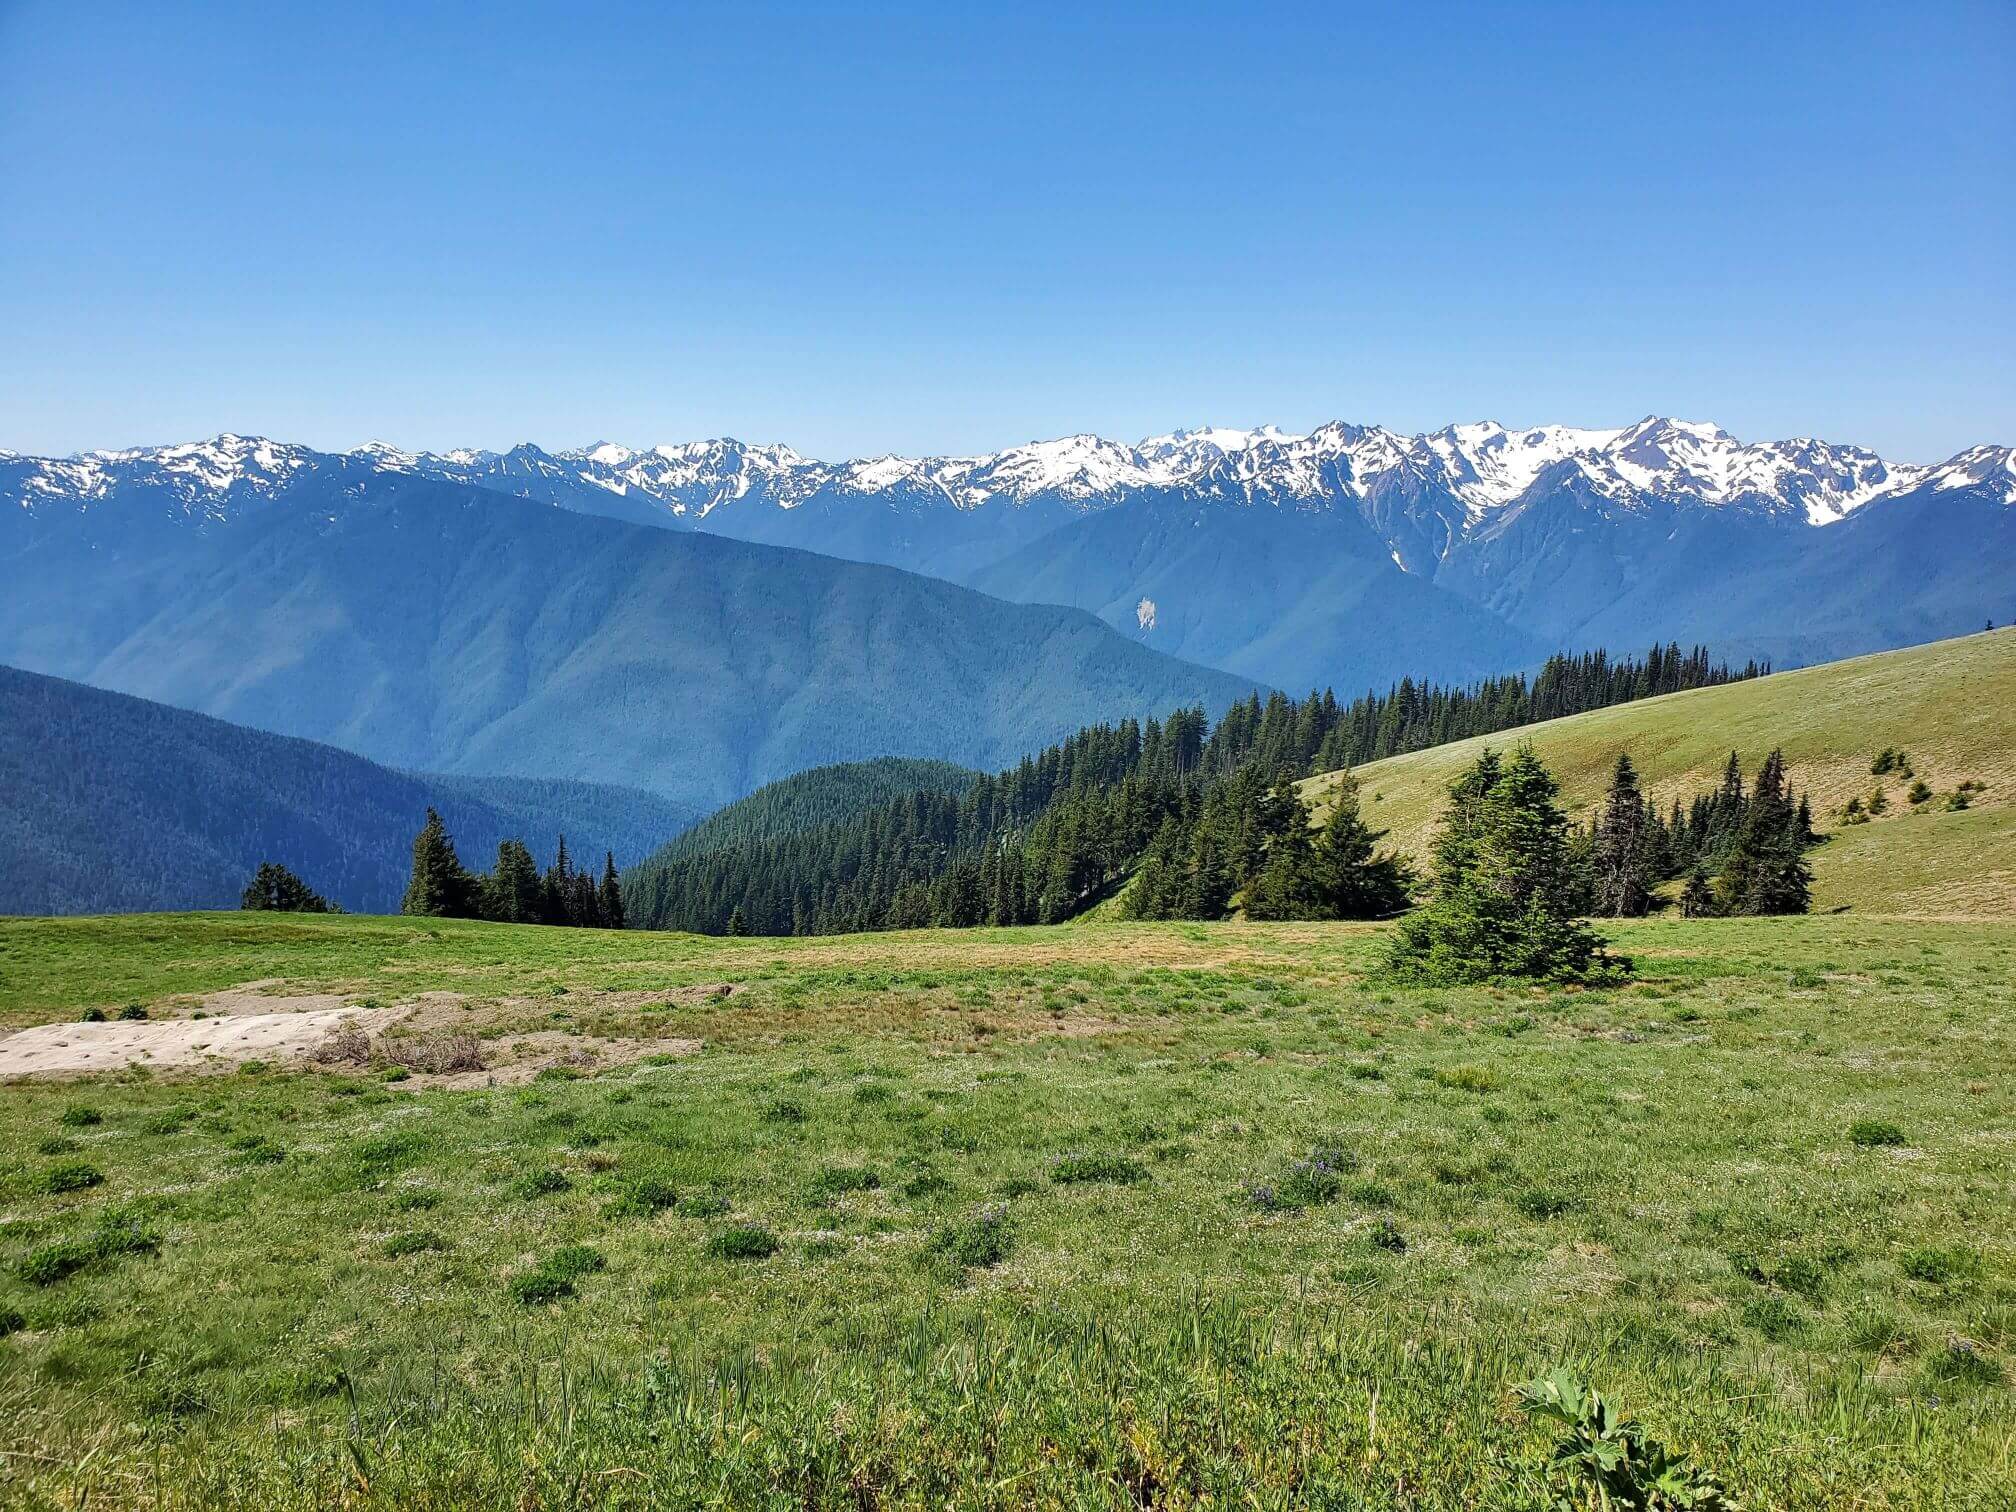 View of the Olympic Mountains from the Hurricane Ridge Visitor Center in Olympic National Park